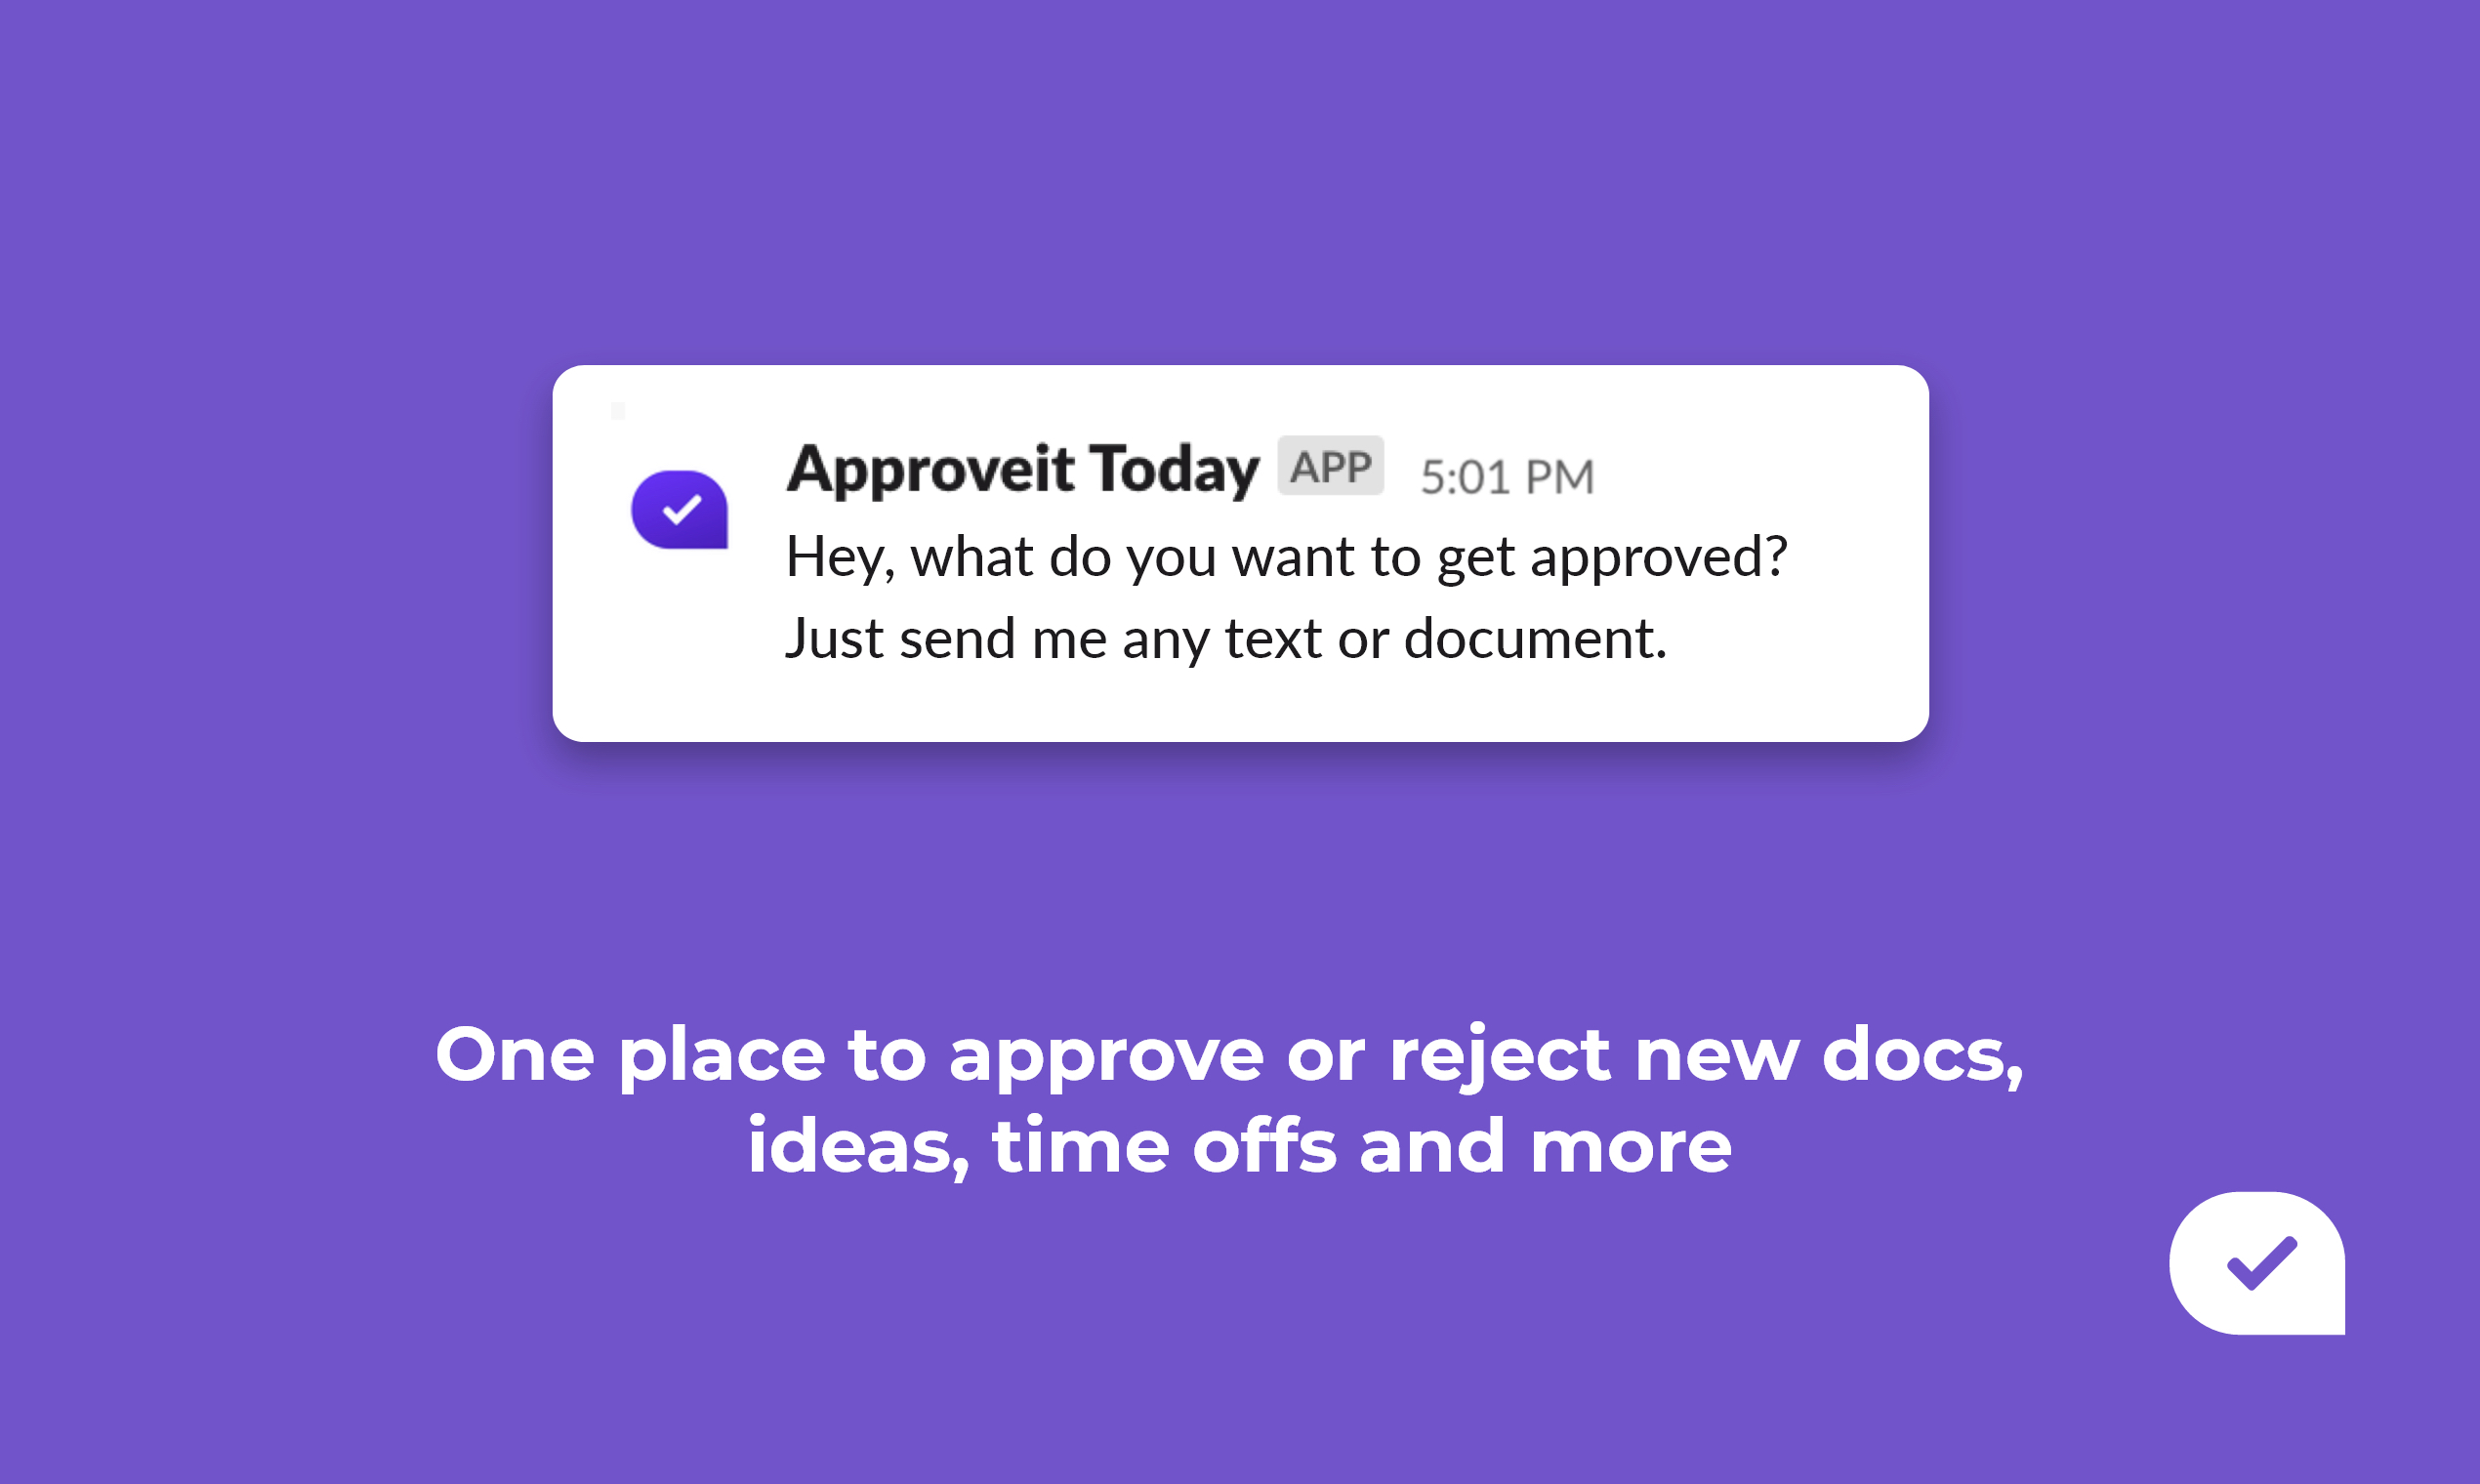 Find pricing, reviews and other details about Approveit Today